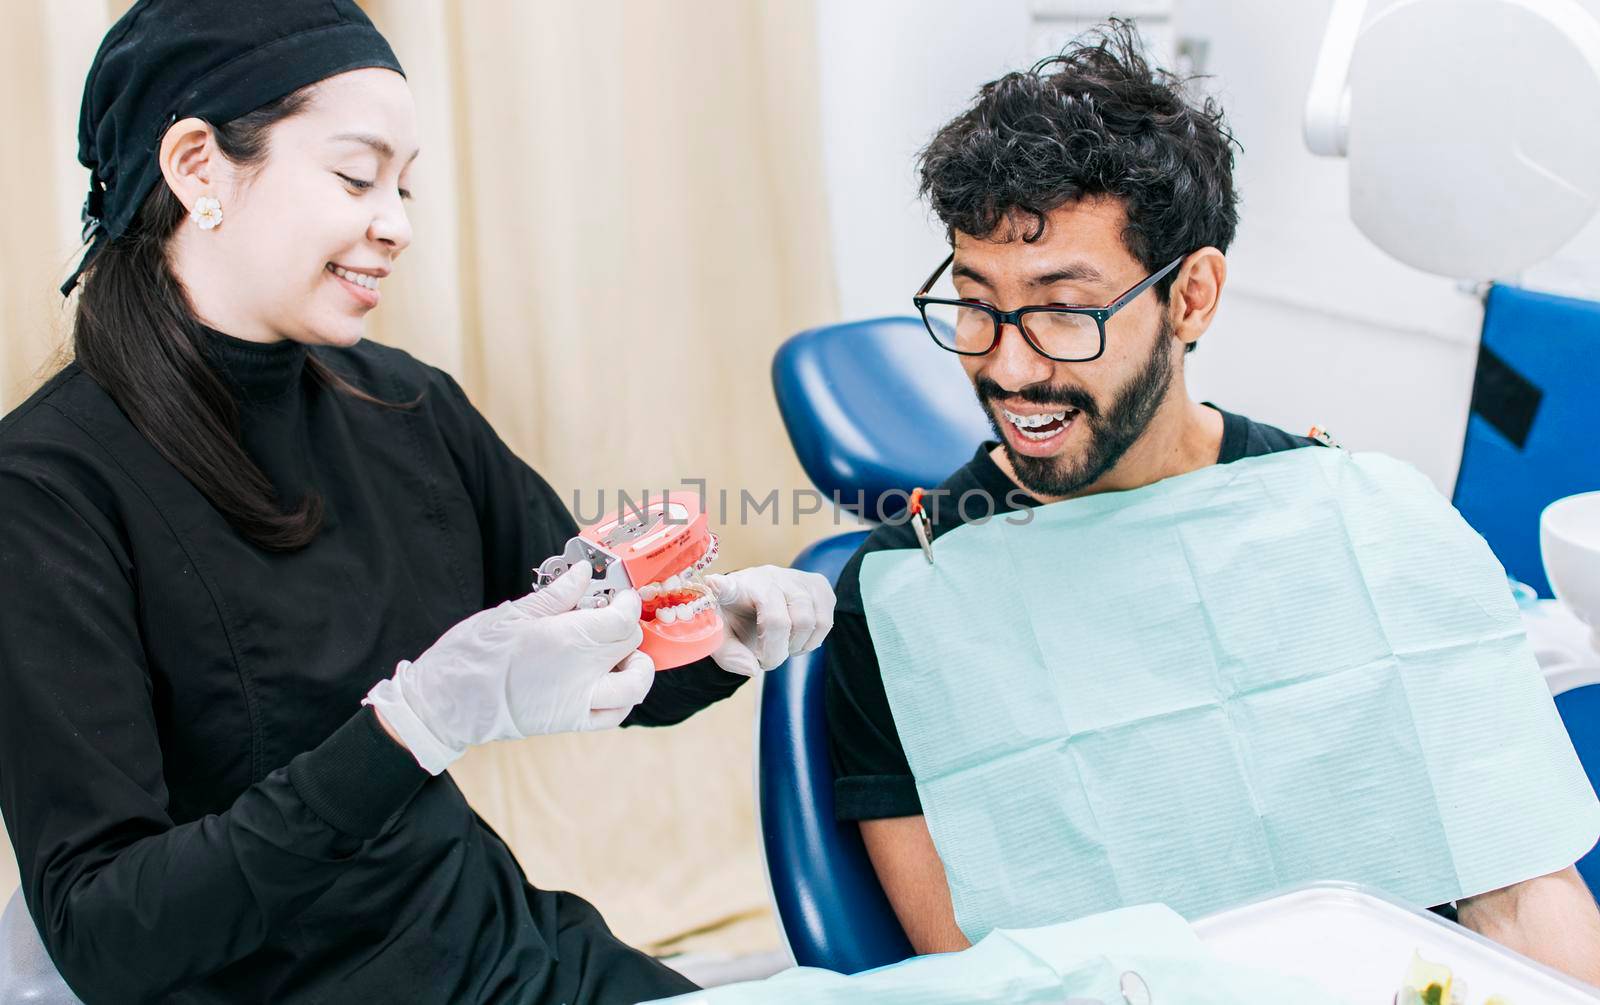 Dentist with patient showing a denture, dentist pointing out a denture to a patient, dentist explaining dental hygiene to a patient by isaiphoto